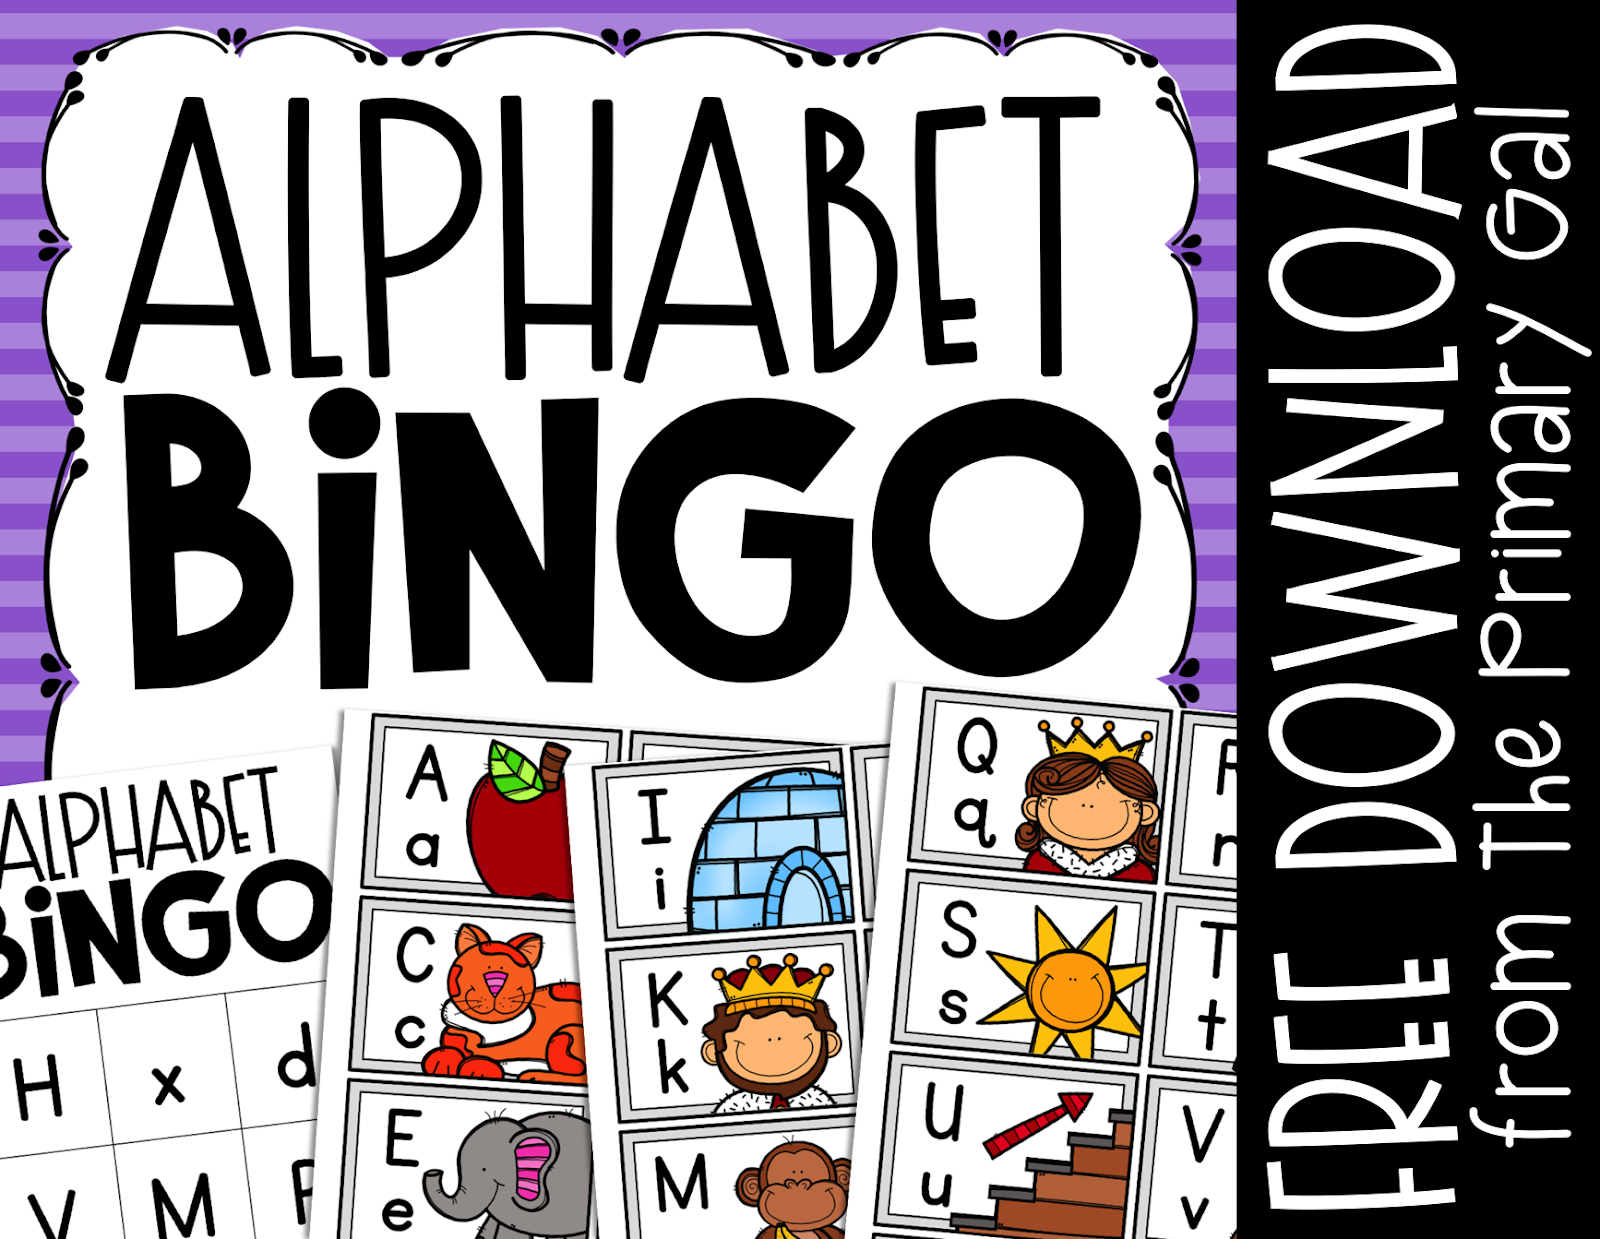 Struggling to find a new, engaging way to practice letters and sounds? These 4 game will make it simple. Whether you play for 2 minutes or 20, your early elementary students will love the games. Download the freebie to take advantage of the printable letter cards and bingo boards. You can also purchase progress monitoring tools to ensure your students are retaining the information. These 4 ideas will require little prep and can be utilized in small groups or centers. {lower elementary, freebie, alphabet}